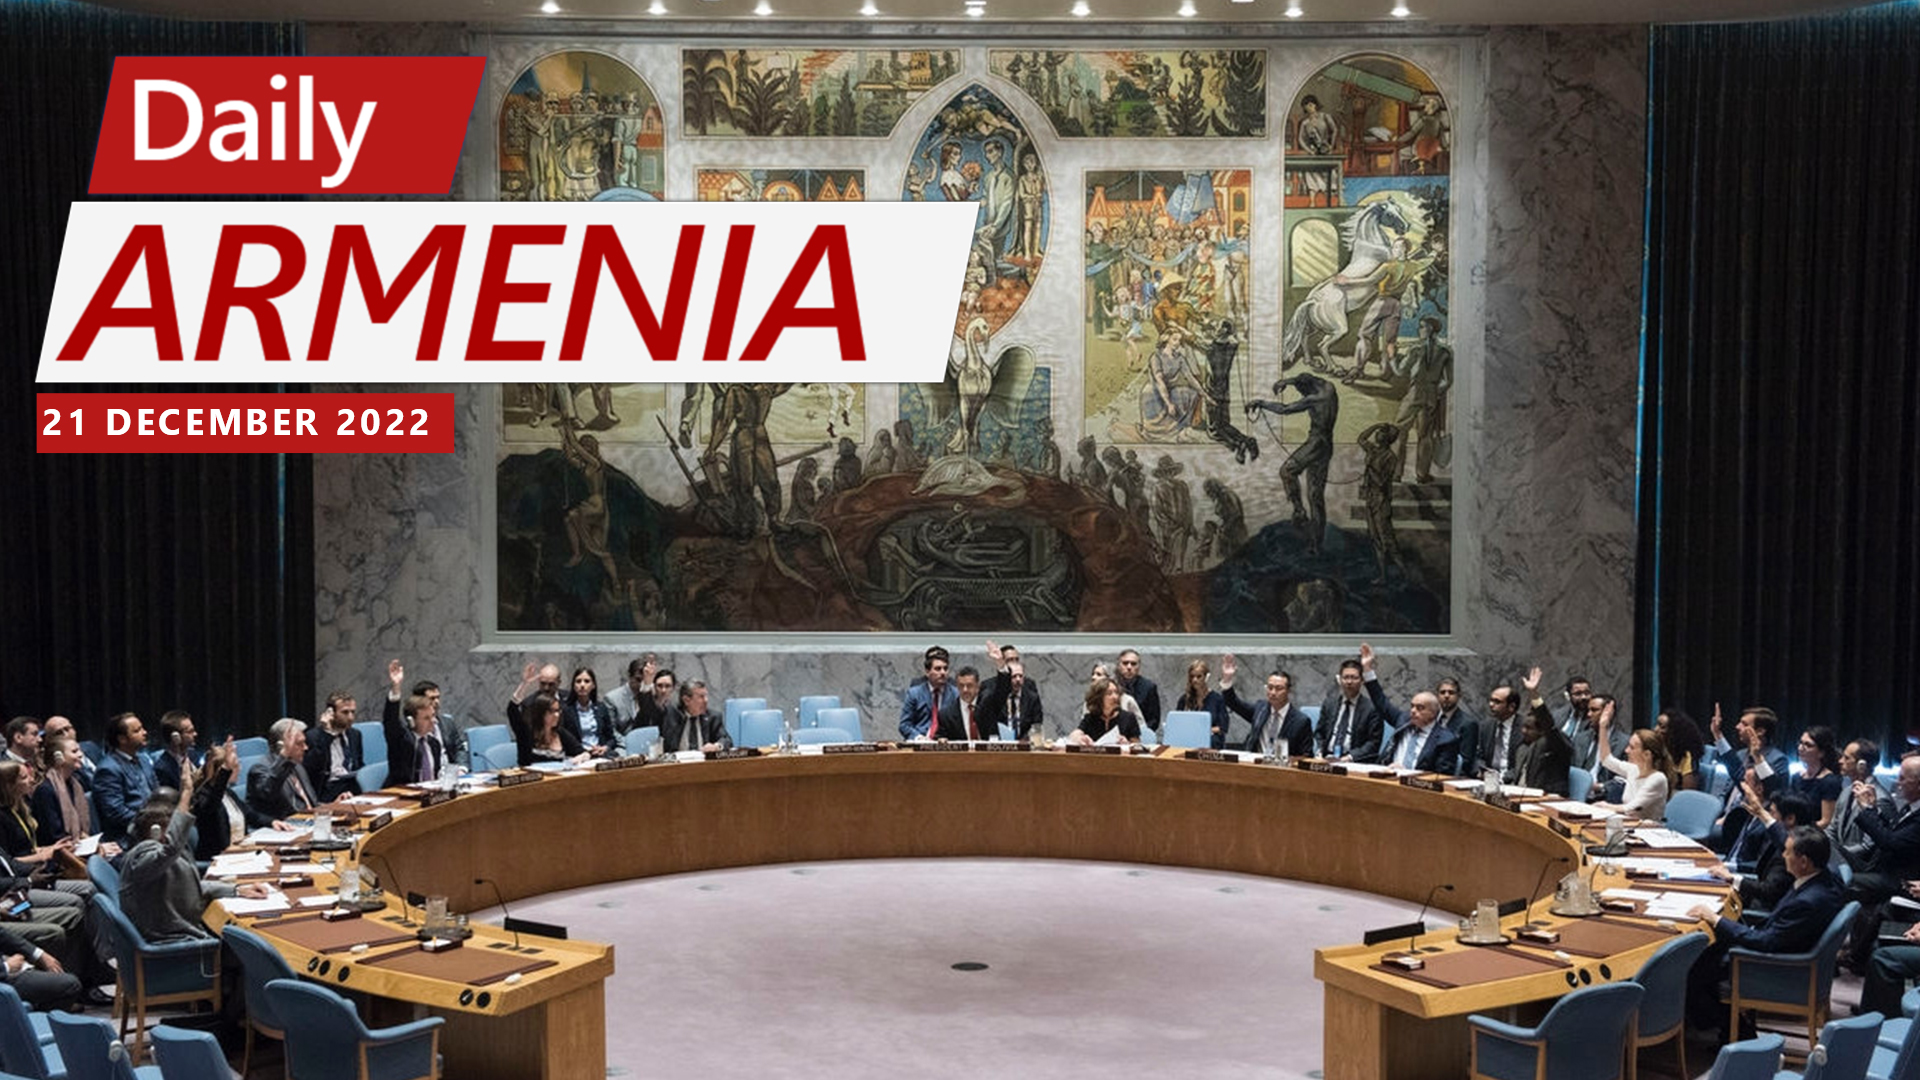 Artsakh remains in blockade for the 10th day as UNSC calls on Azerbaijan to open road